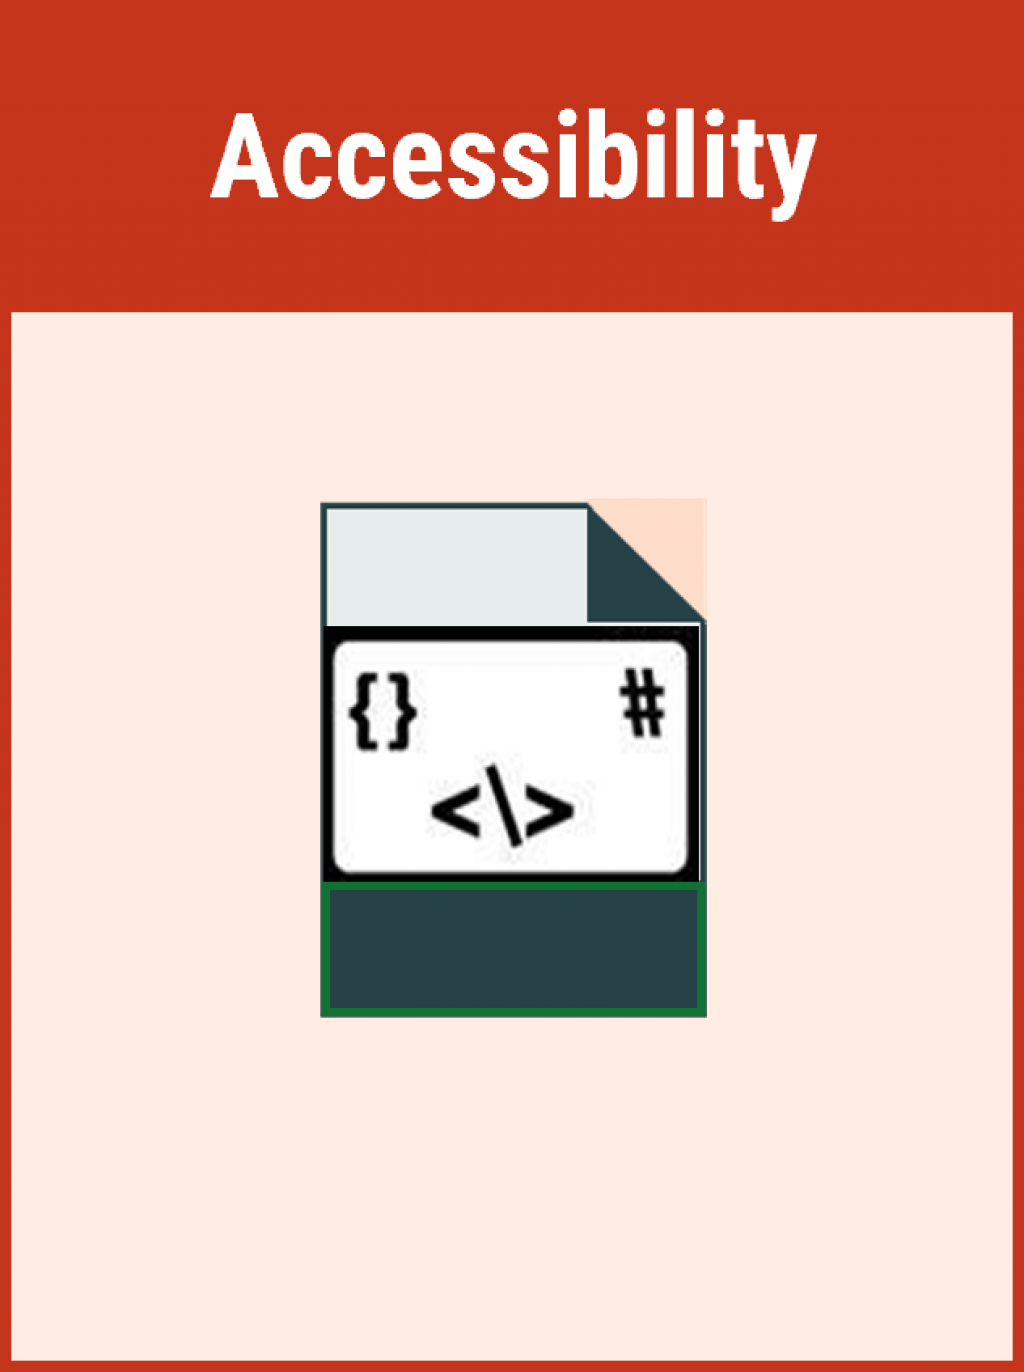 Models should be accessible in standard formats. Illustration shows a document icon. Inside the icon, there is a white square that contains three symbols; a pair of curly brackets, hash and finally left angle bracket, back slash, right angle bracket.